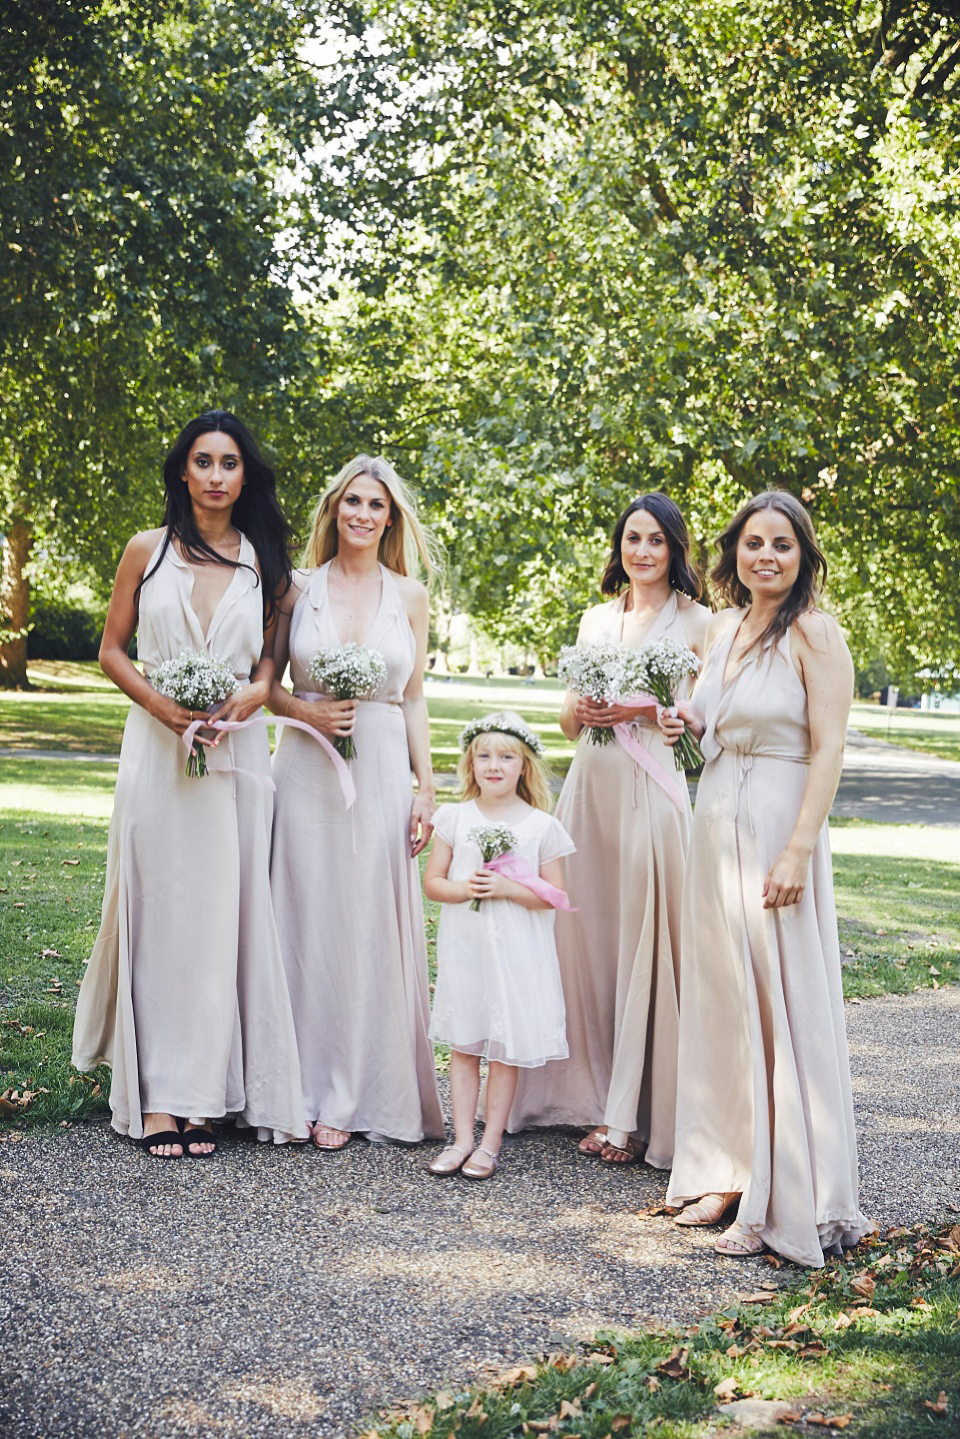 Bride Jessica wore two dresses for her modern, cool and contemporary London wedding, styled to perfection by Liz Linkleter.